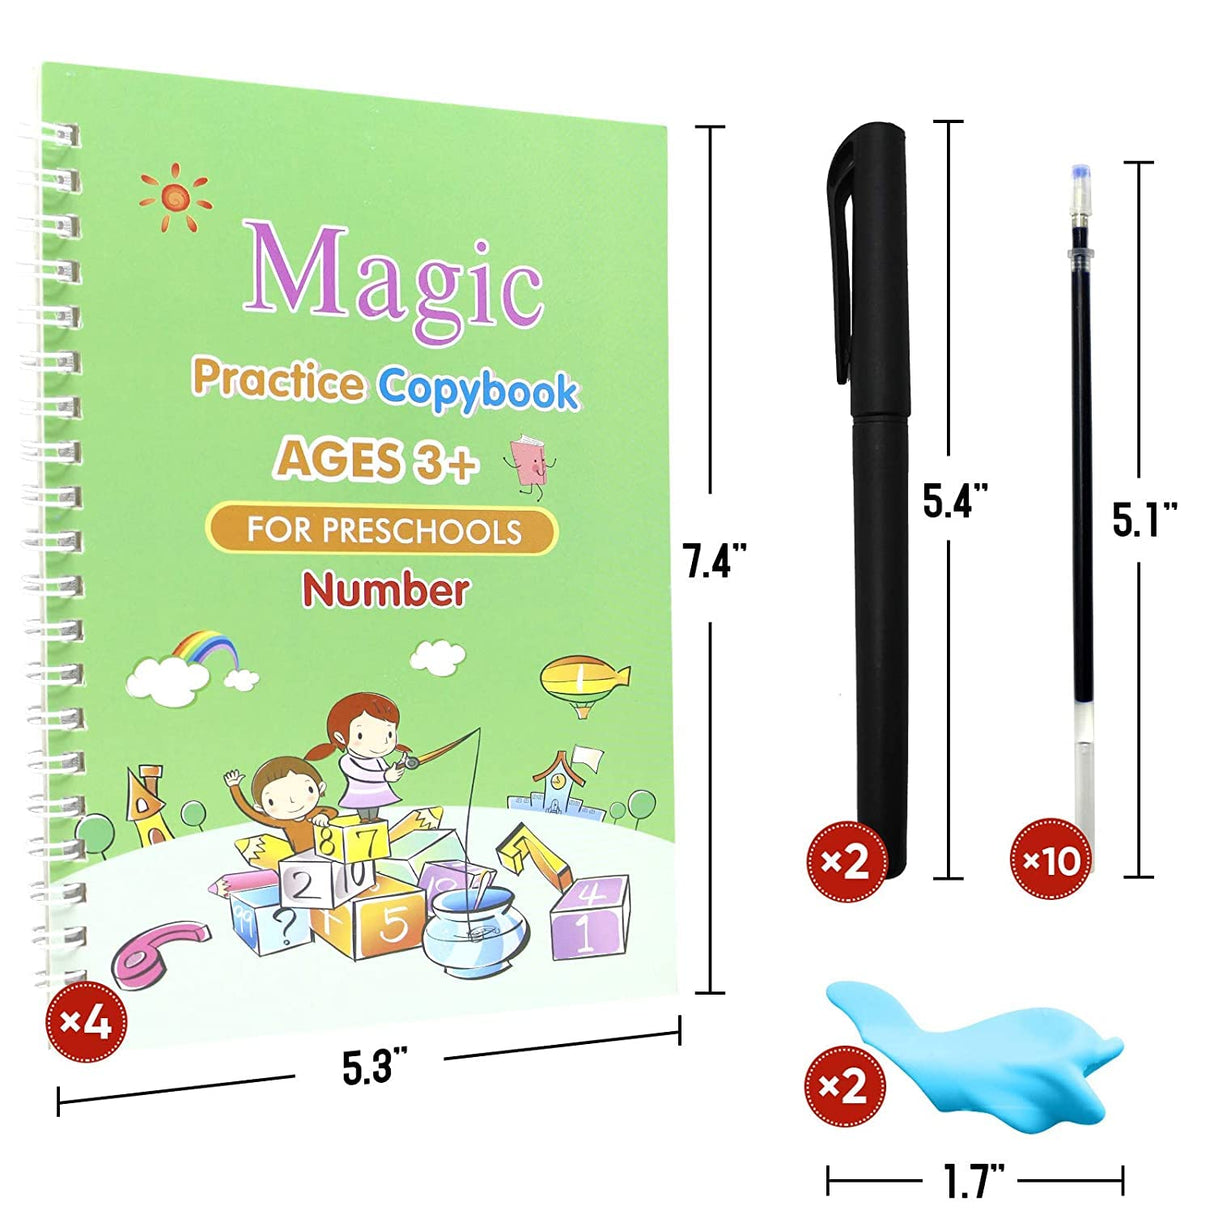 Magic Groove: Four Book + Pens DEAL + 50% OFF!